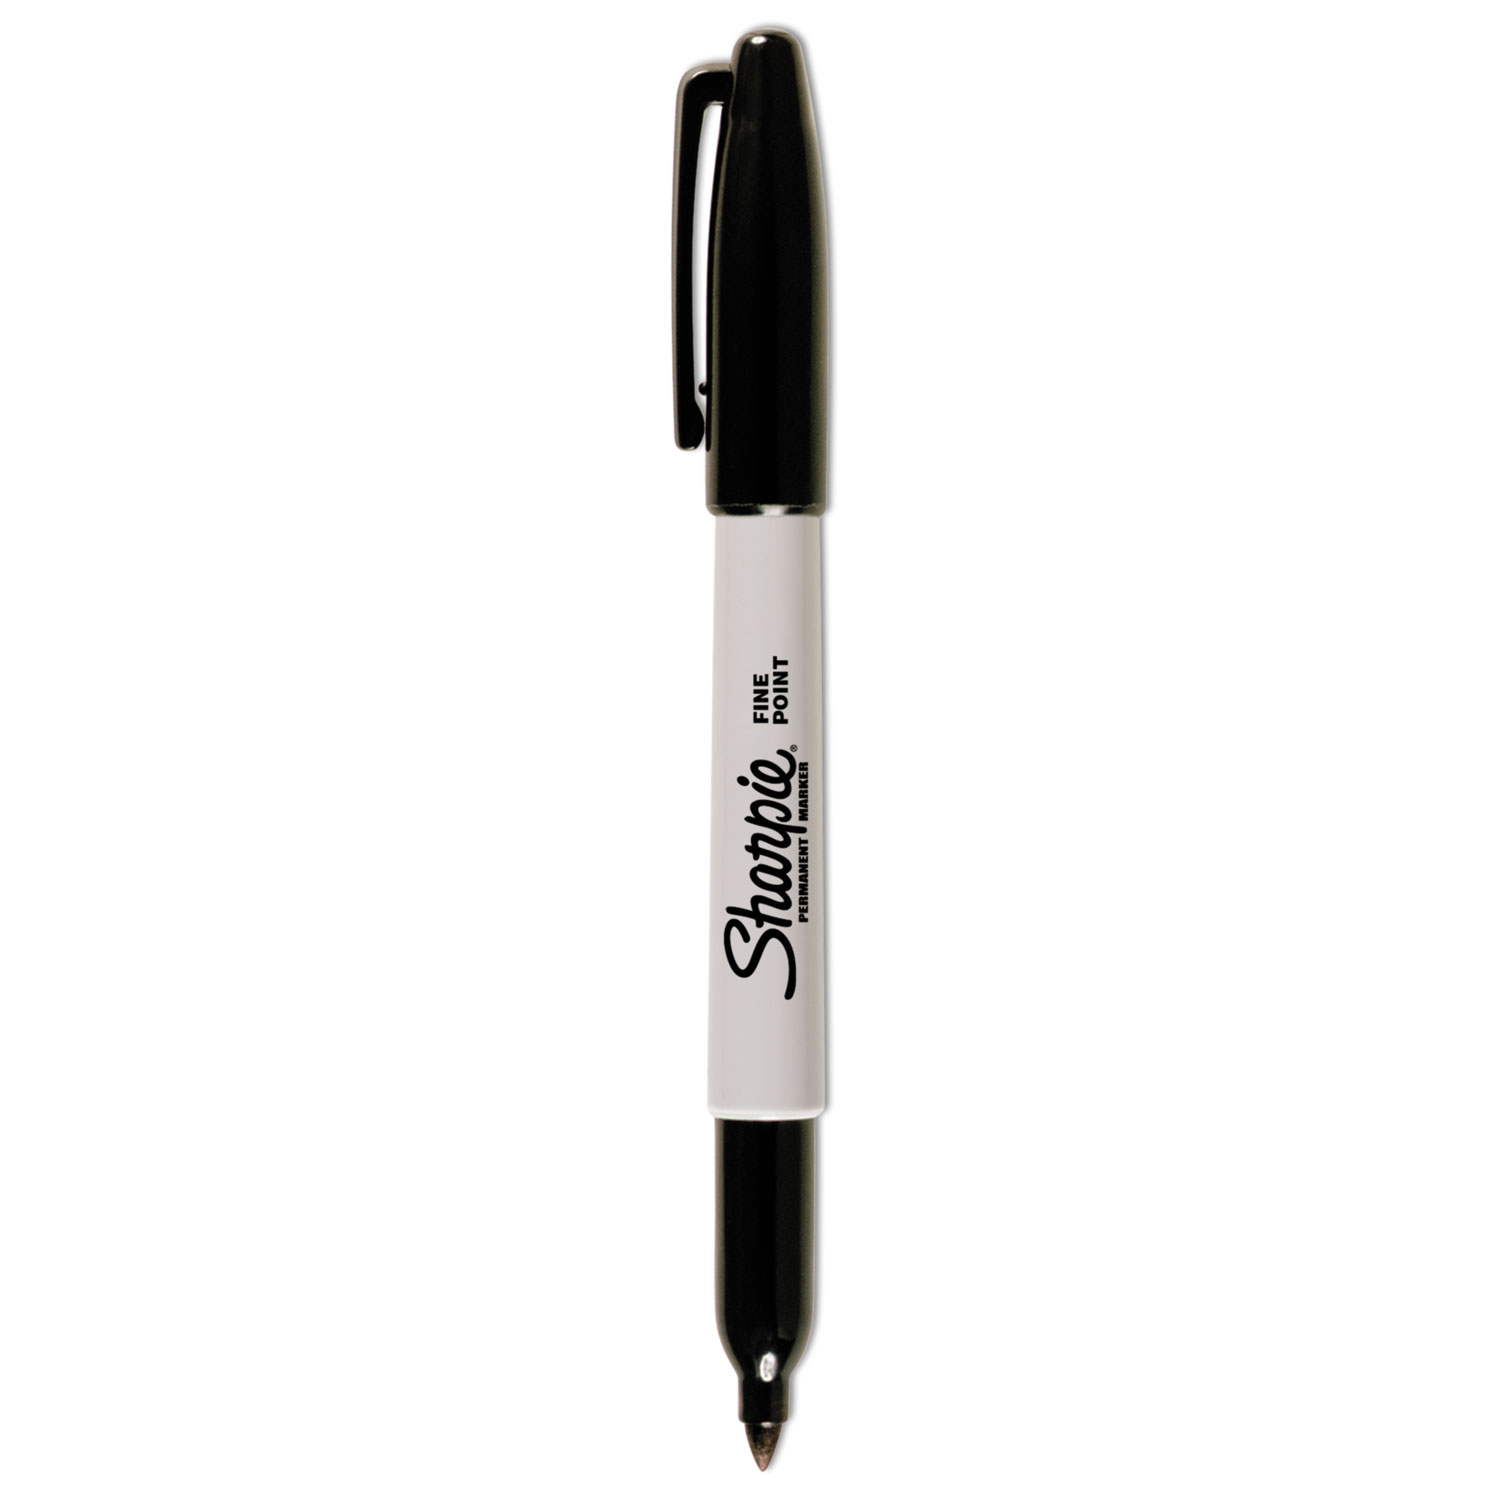 Sharpie Permanent Markers, Fine Point, Black Ink, 12-Count